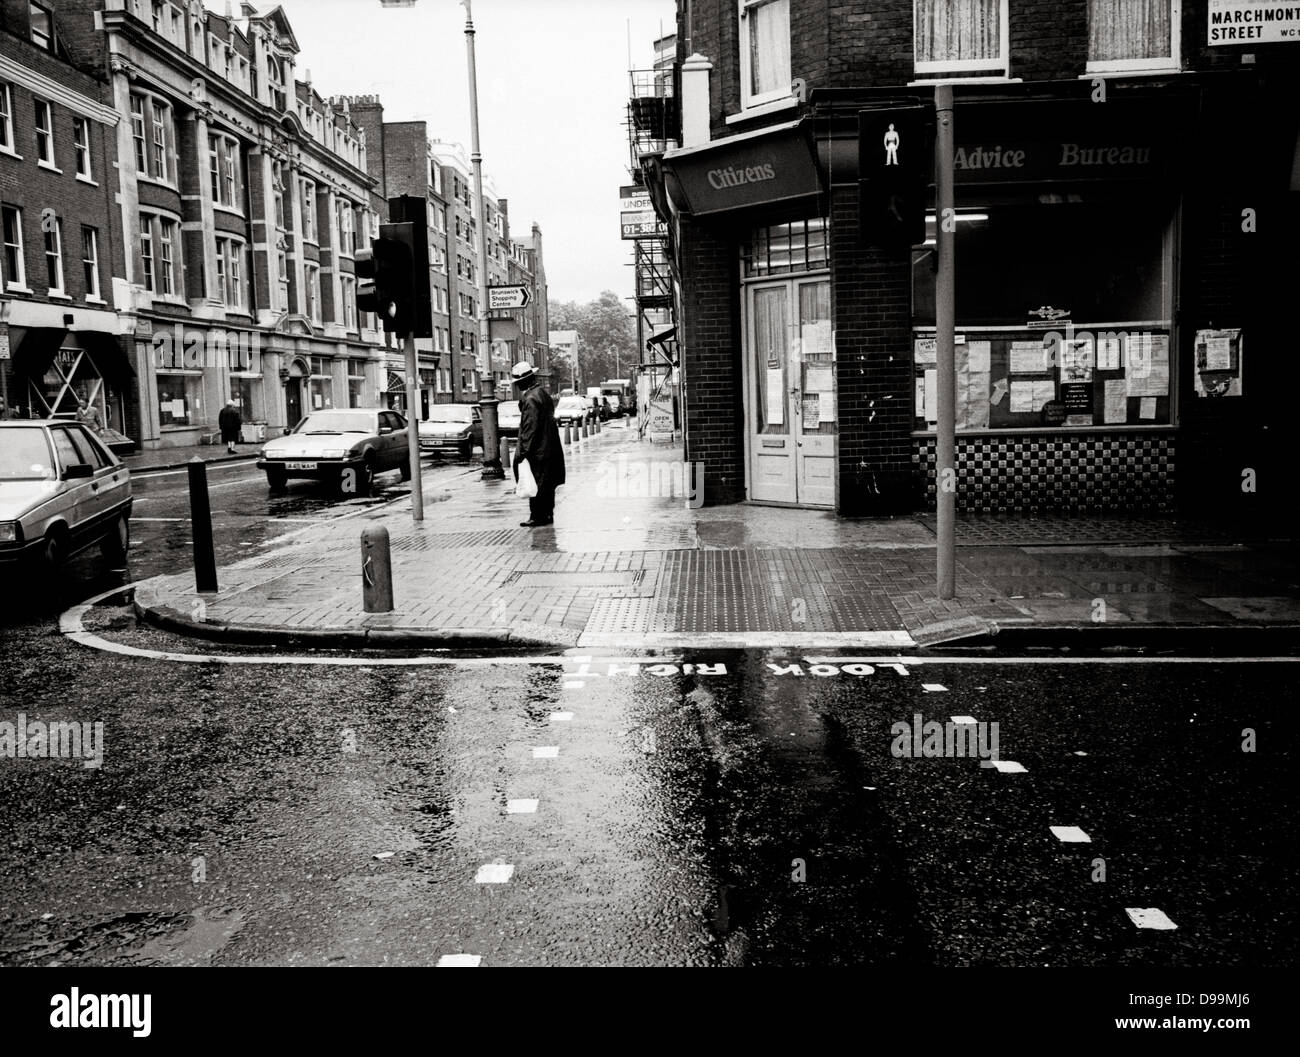 Wet street scene in Marchmont Street, near the Brunswick Centre, Russell Square Bloomsbury, London Stock Photo